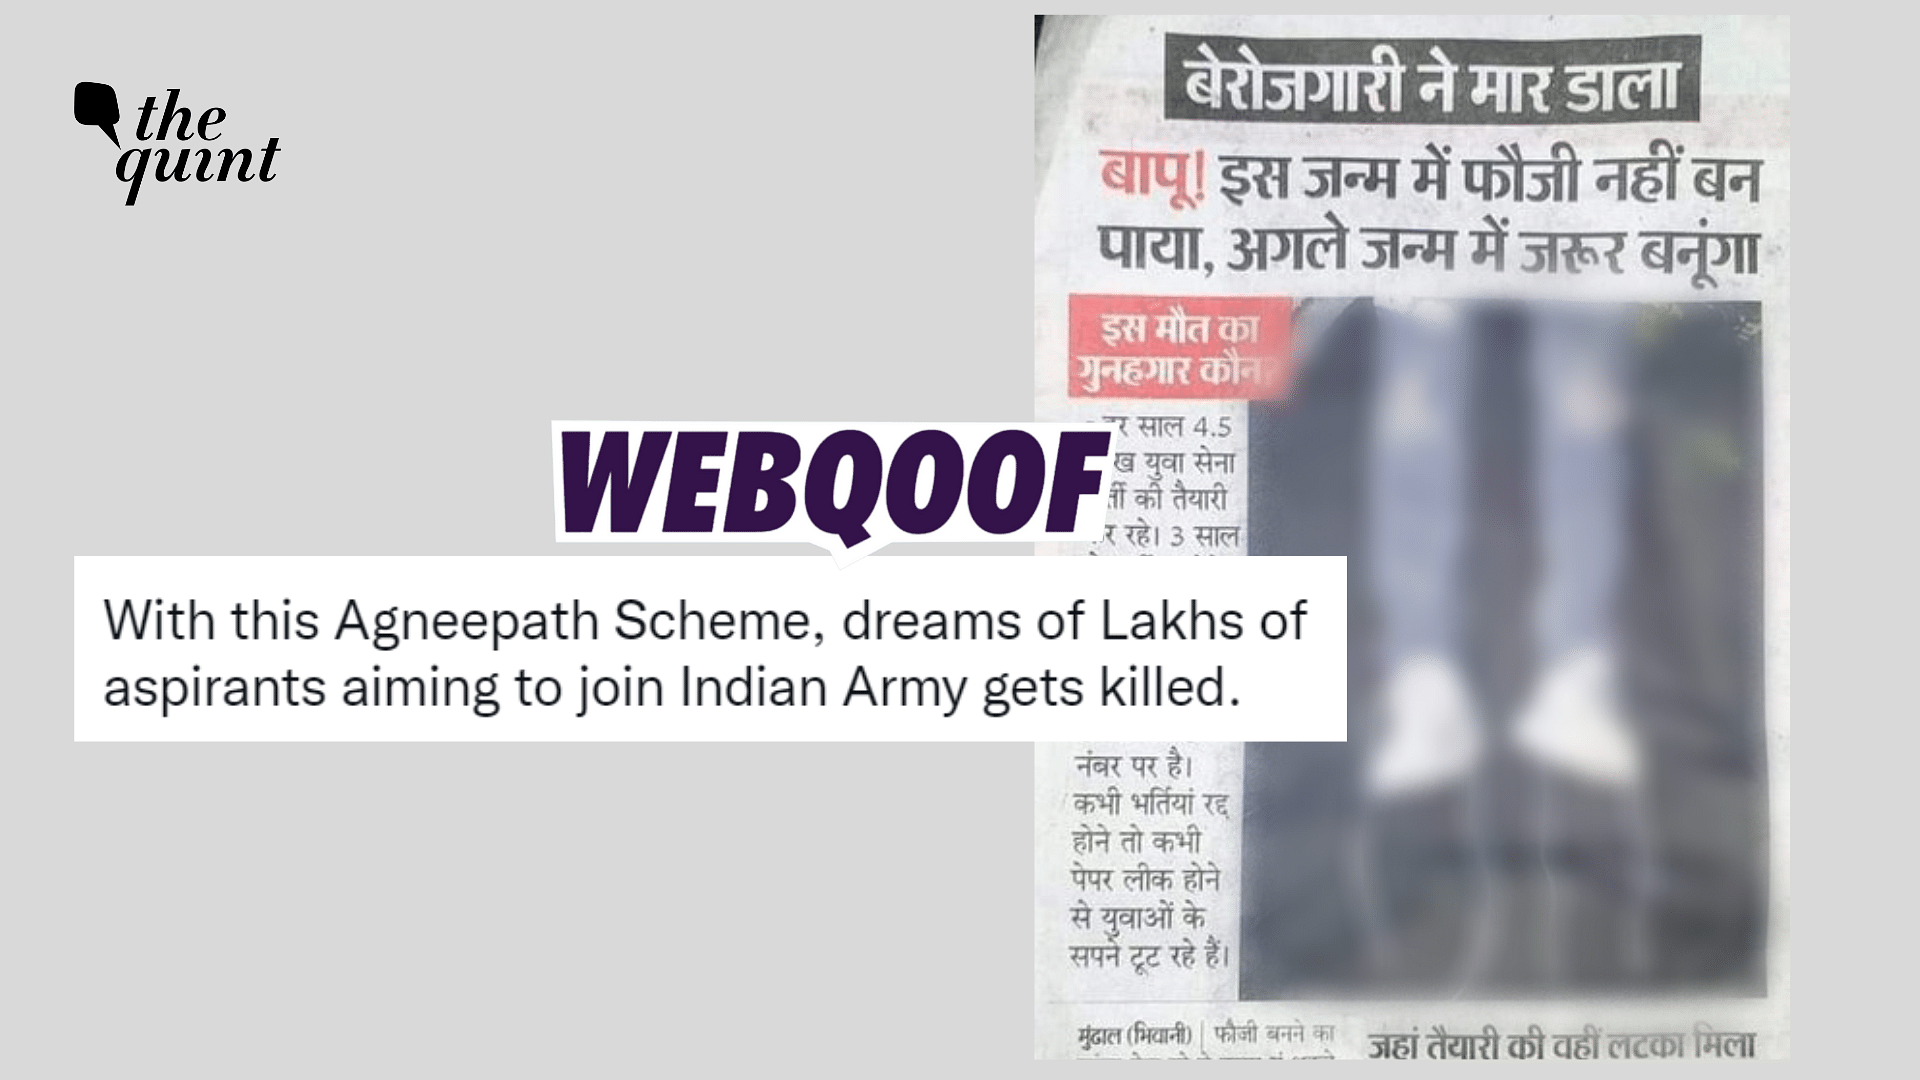 <div class="paragraphs"><p>Fact-check: The newspaper clipping shows a youth killing himself after the government launched the 'Agnitpath' Scheme in India.</p></div>